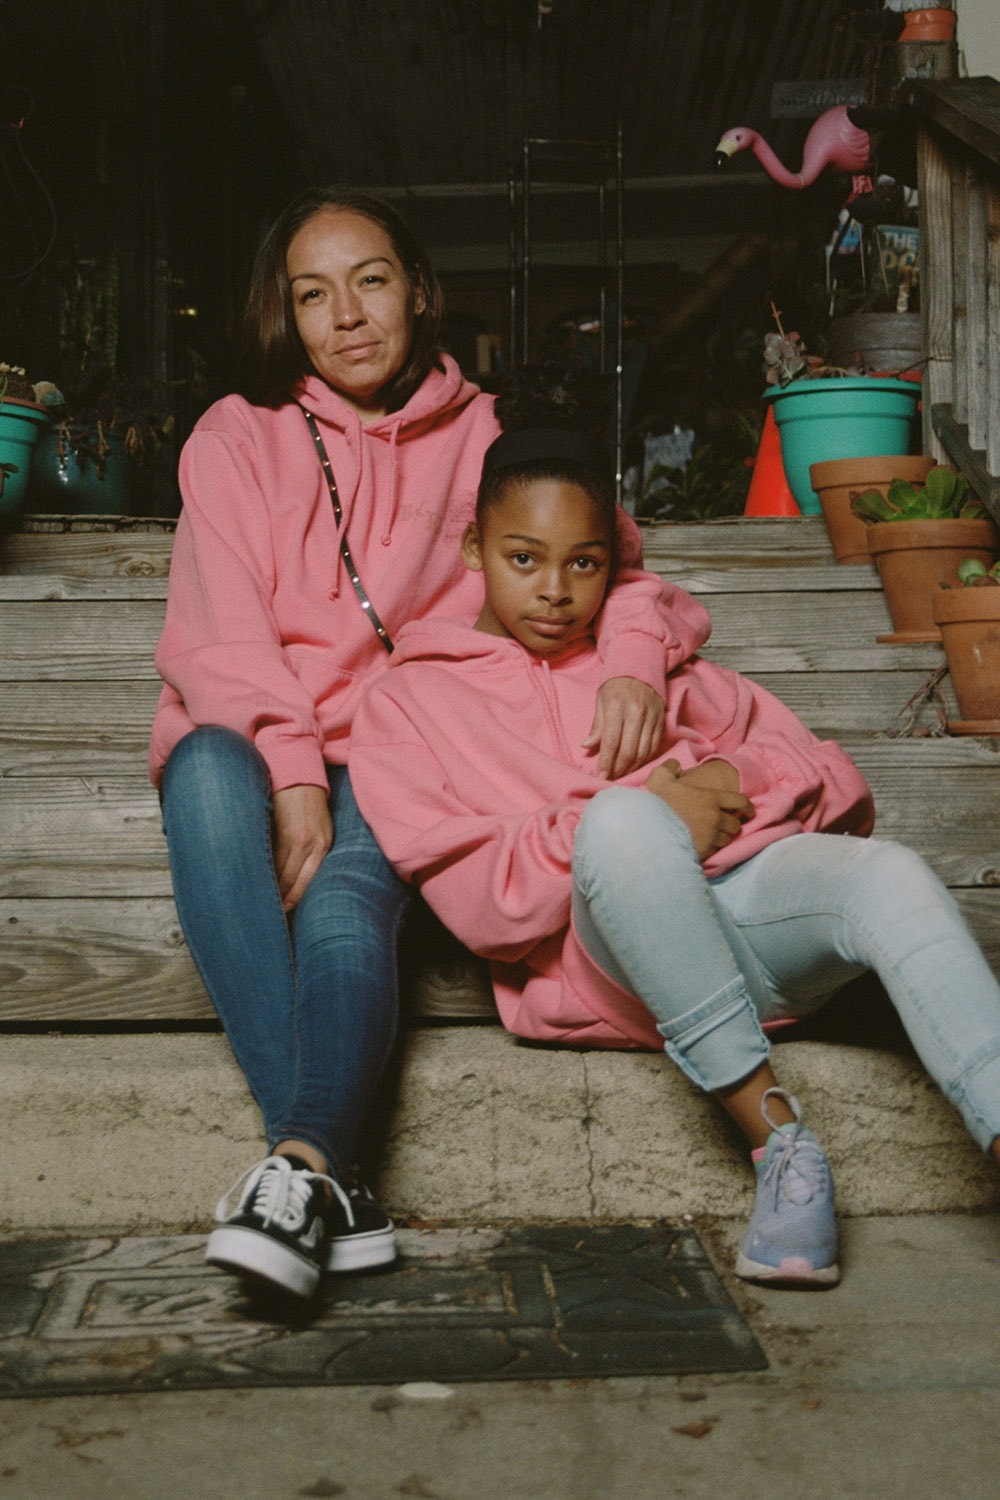 BornxRaised Portraits of Venice Spring Collection